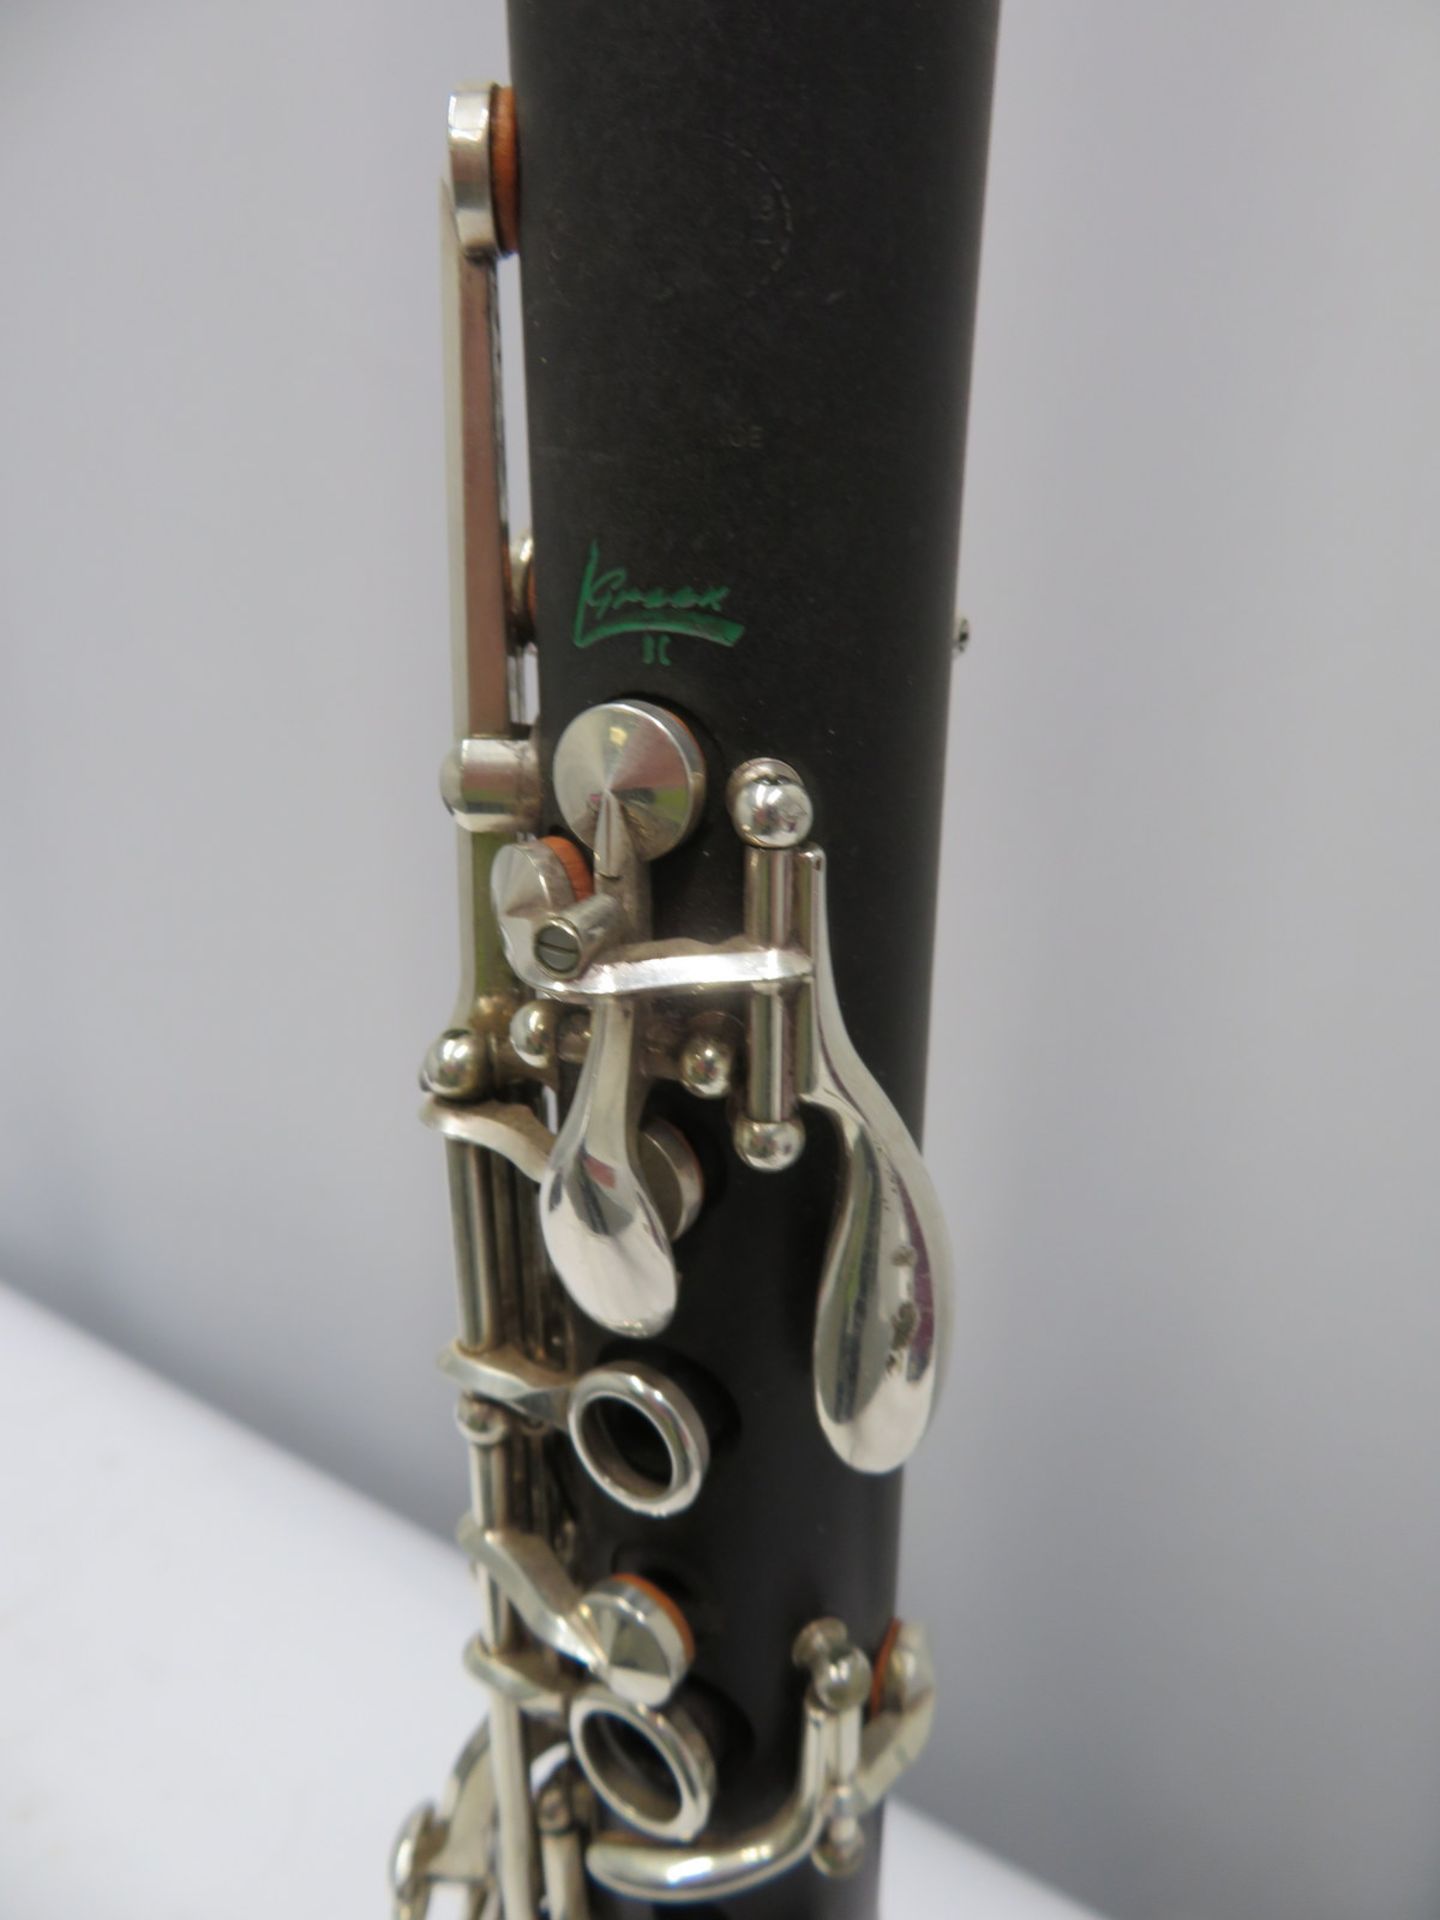 Buffet Crampon L Green clarinet with case. Serial number: 477678. - Image 5 of 19